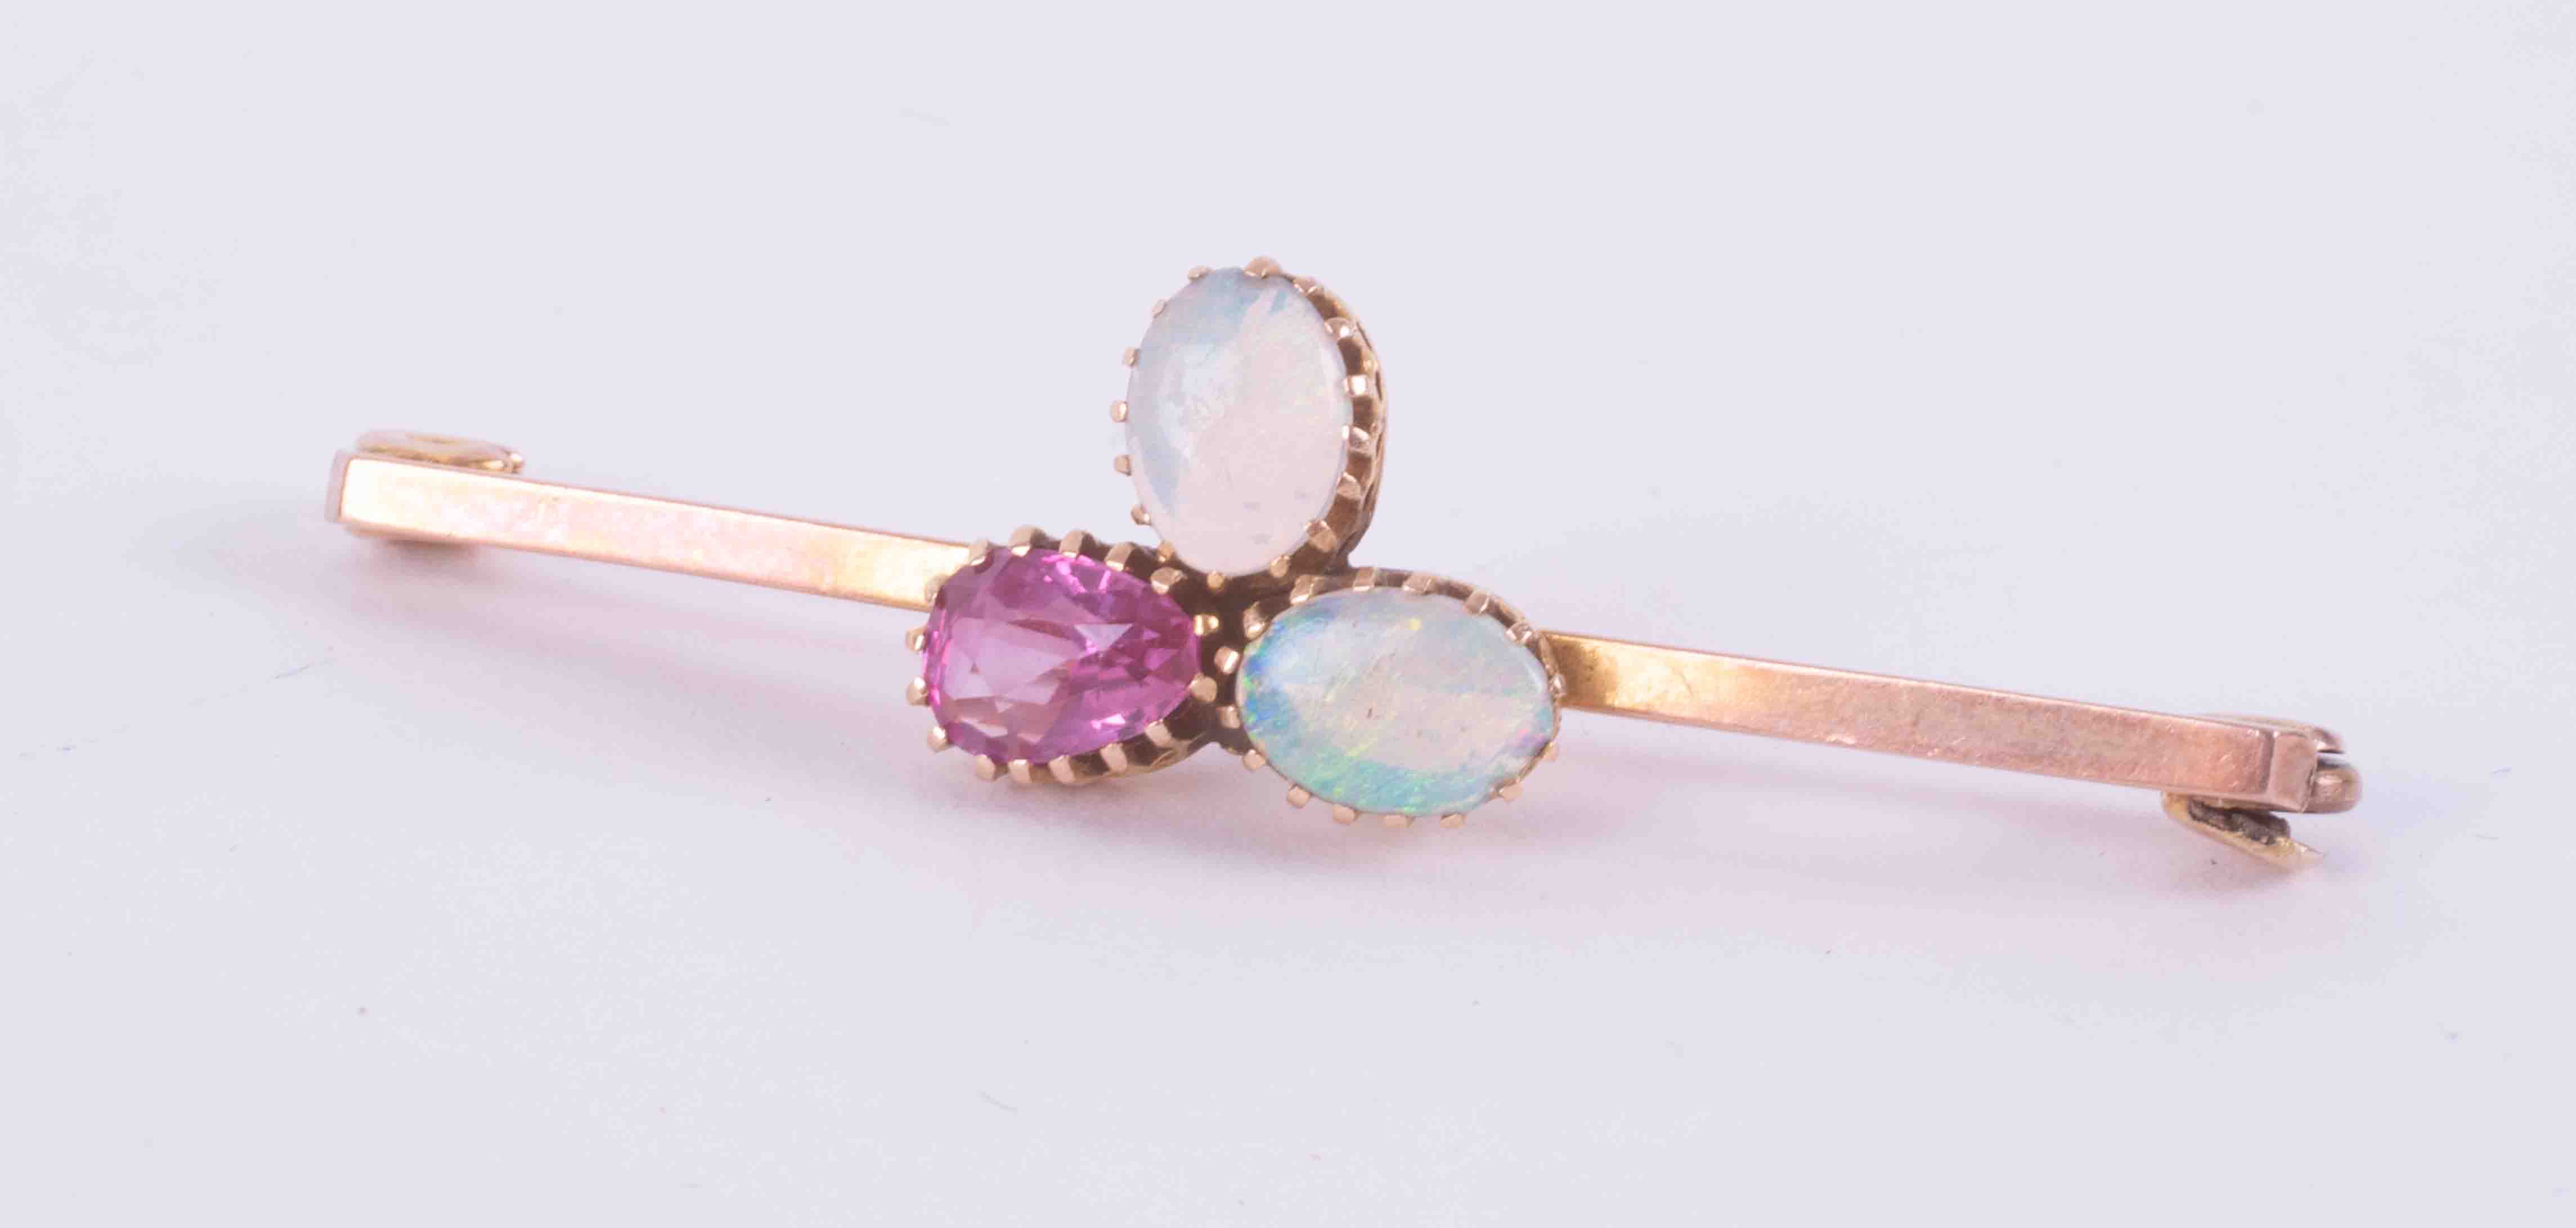 A 9ct rose gold bar brooch set with two white cabochon cut oval opals, measuring approx. 6.5mm x 4.